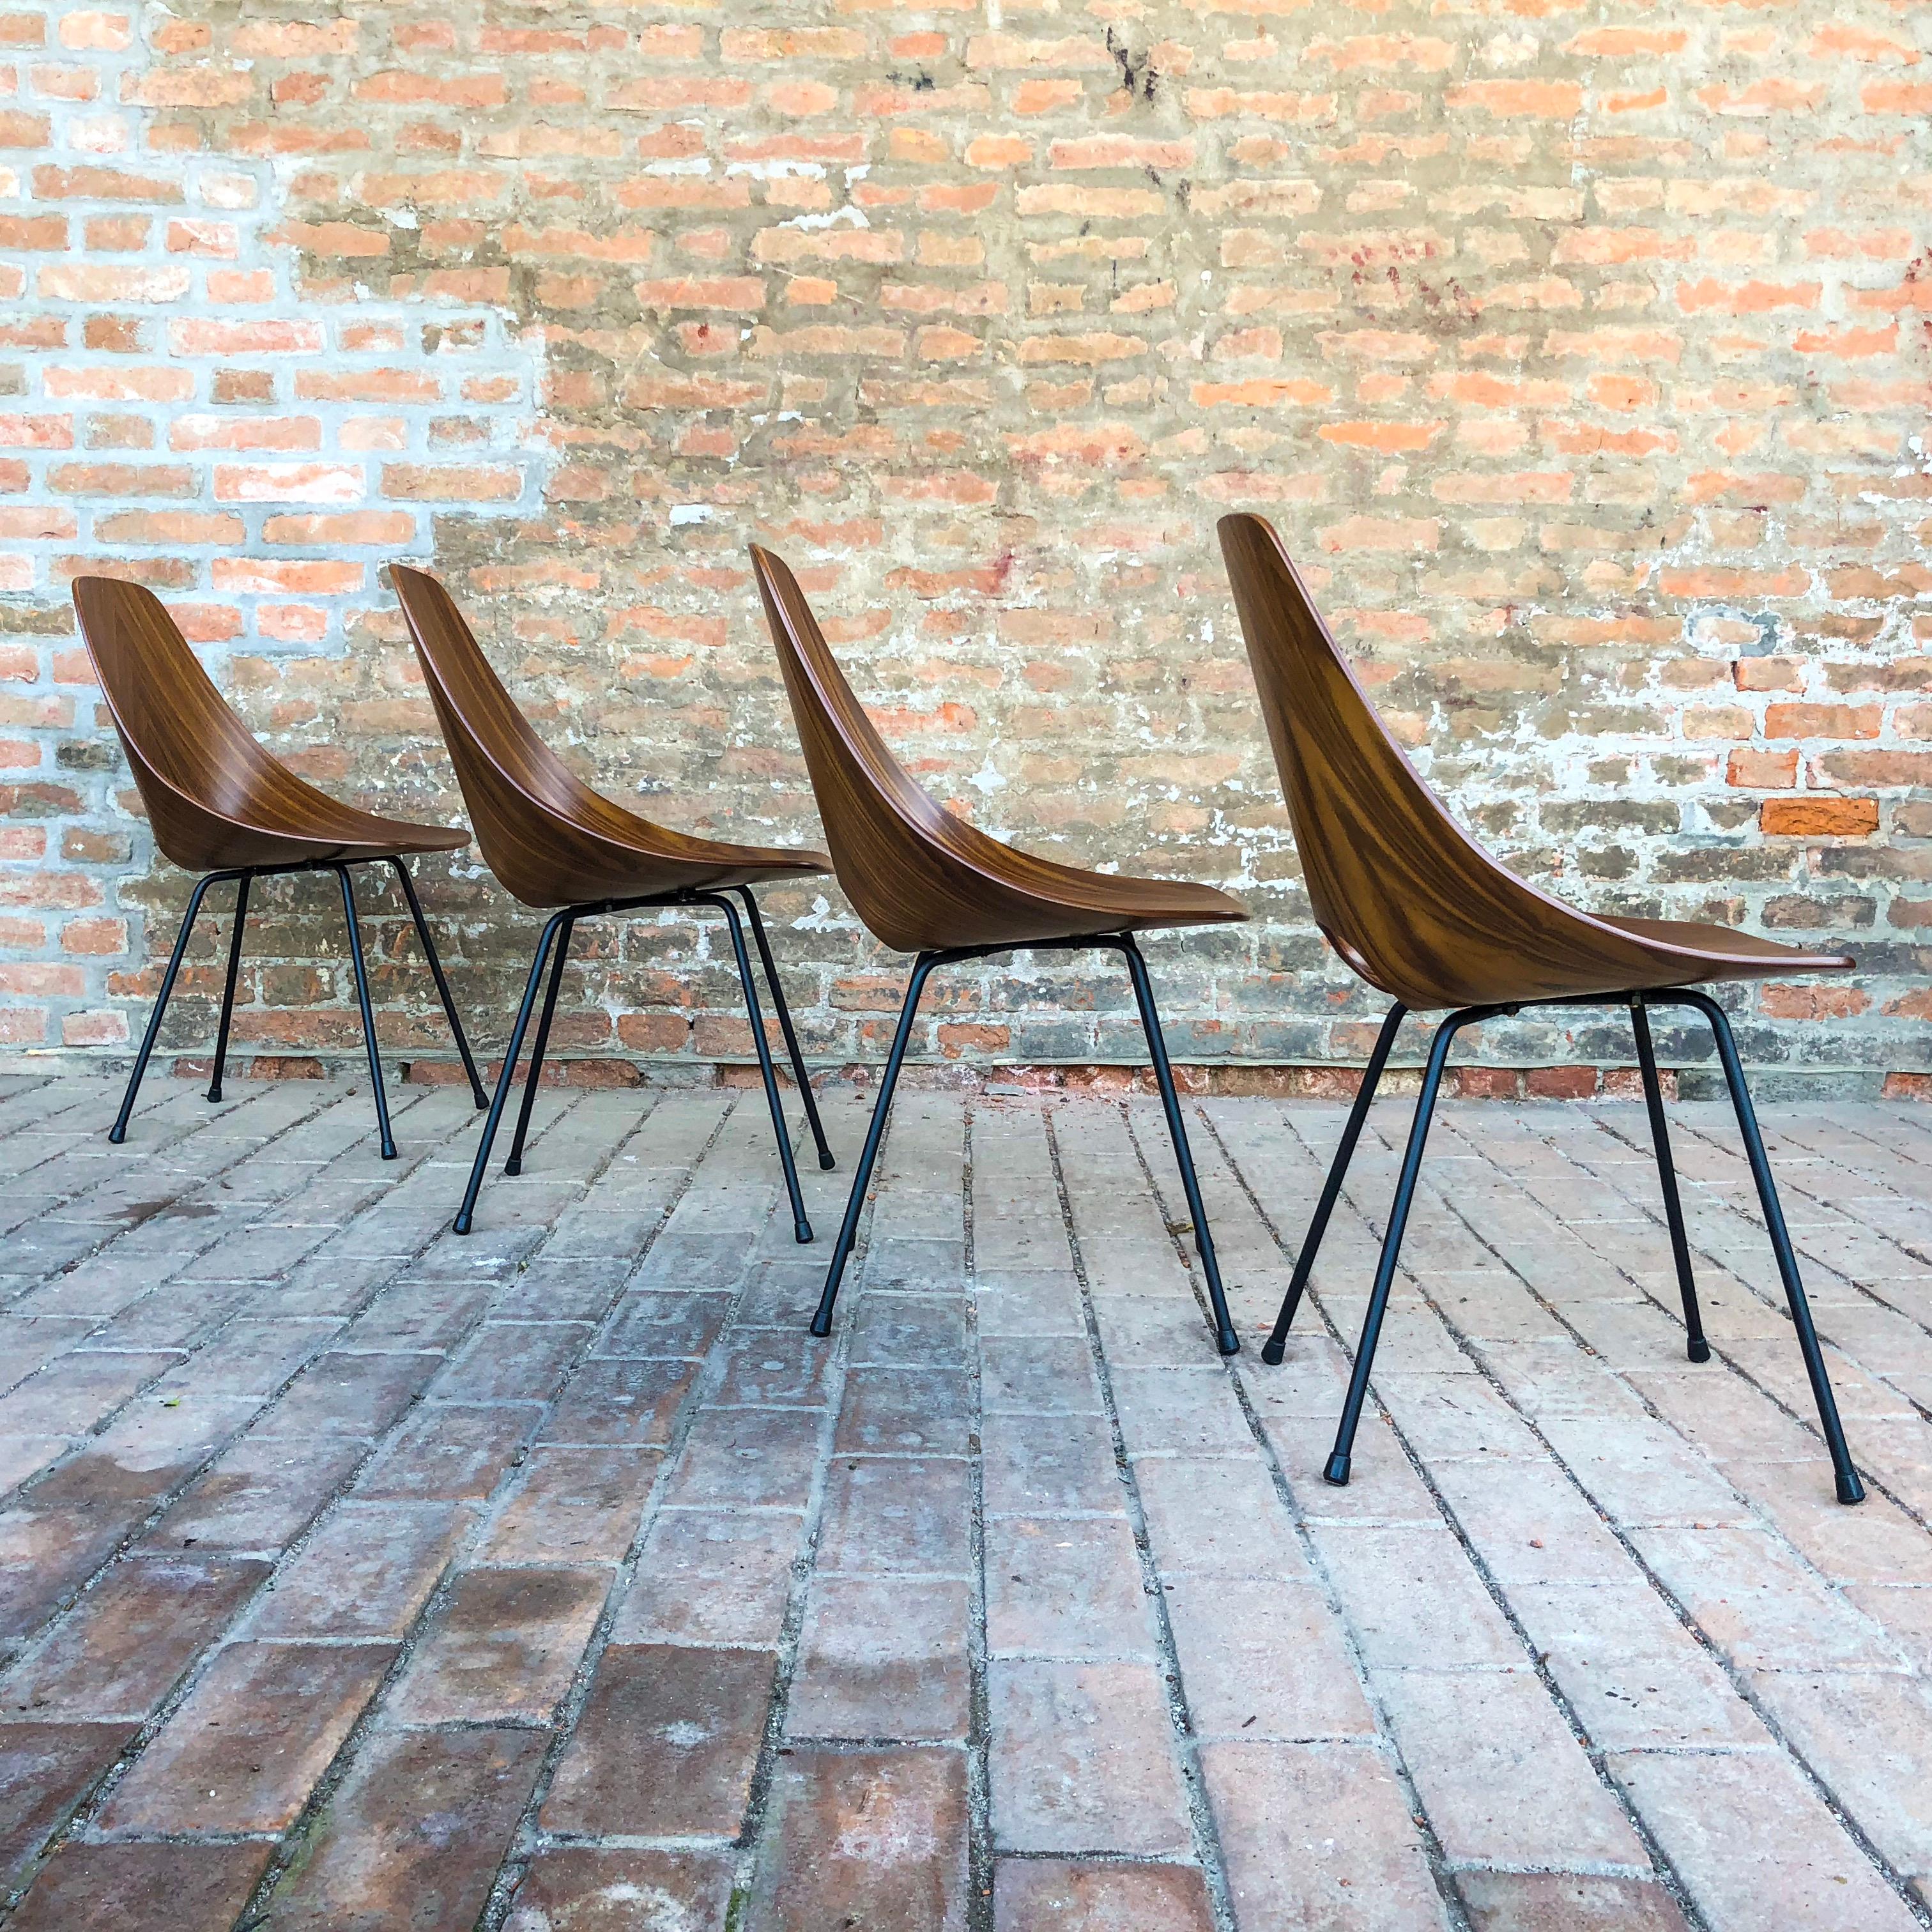 Vittorio Nobili Midcentury Teak Medea Dining Room Chairs, 1956, Set of Six In Excellent Condition For Sale In Padova, IT